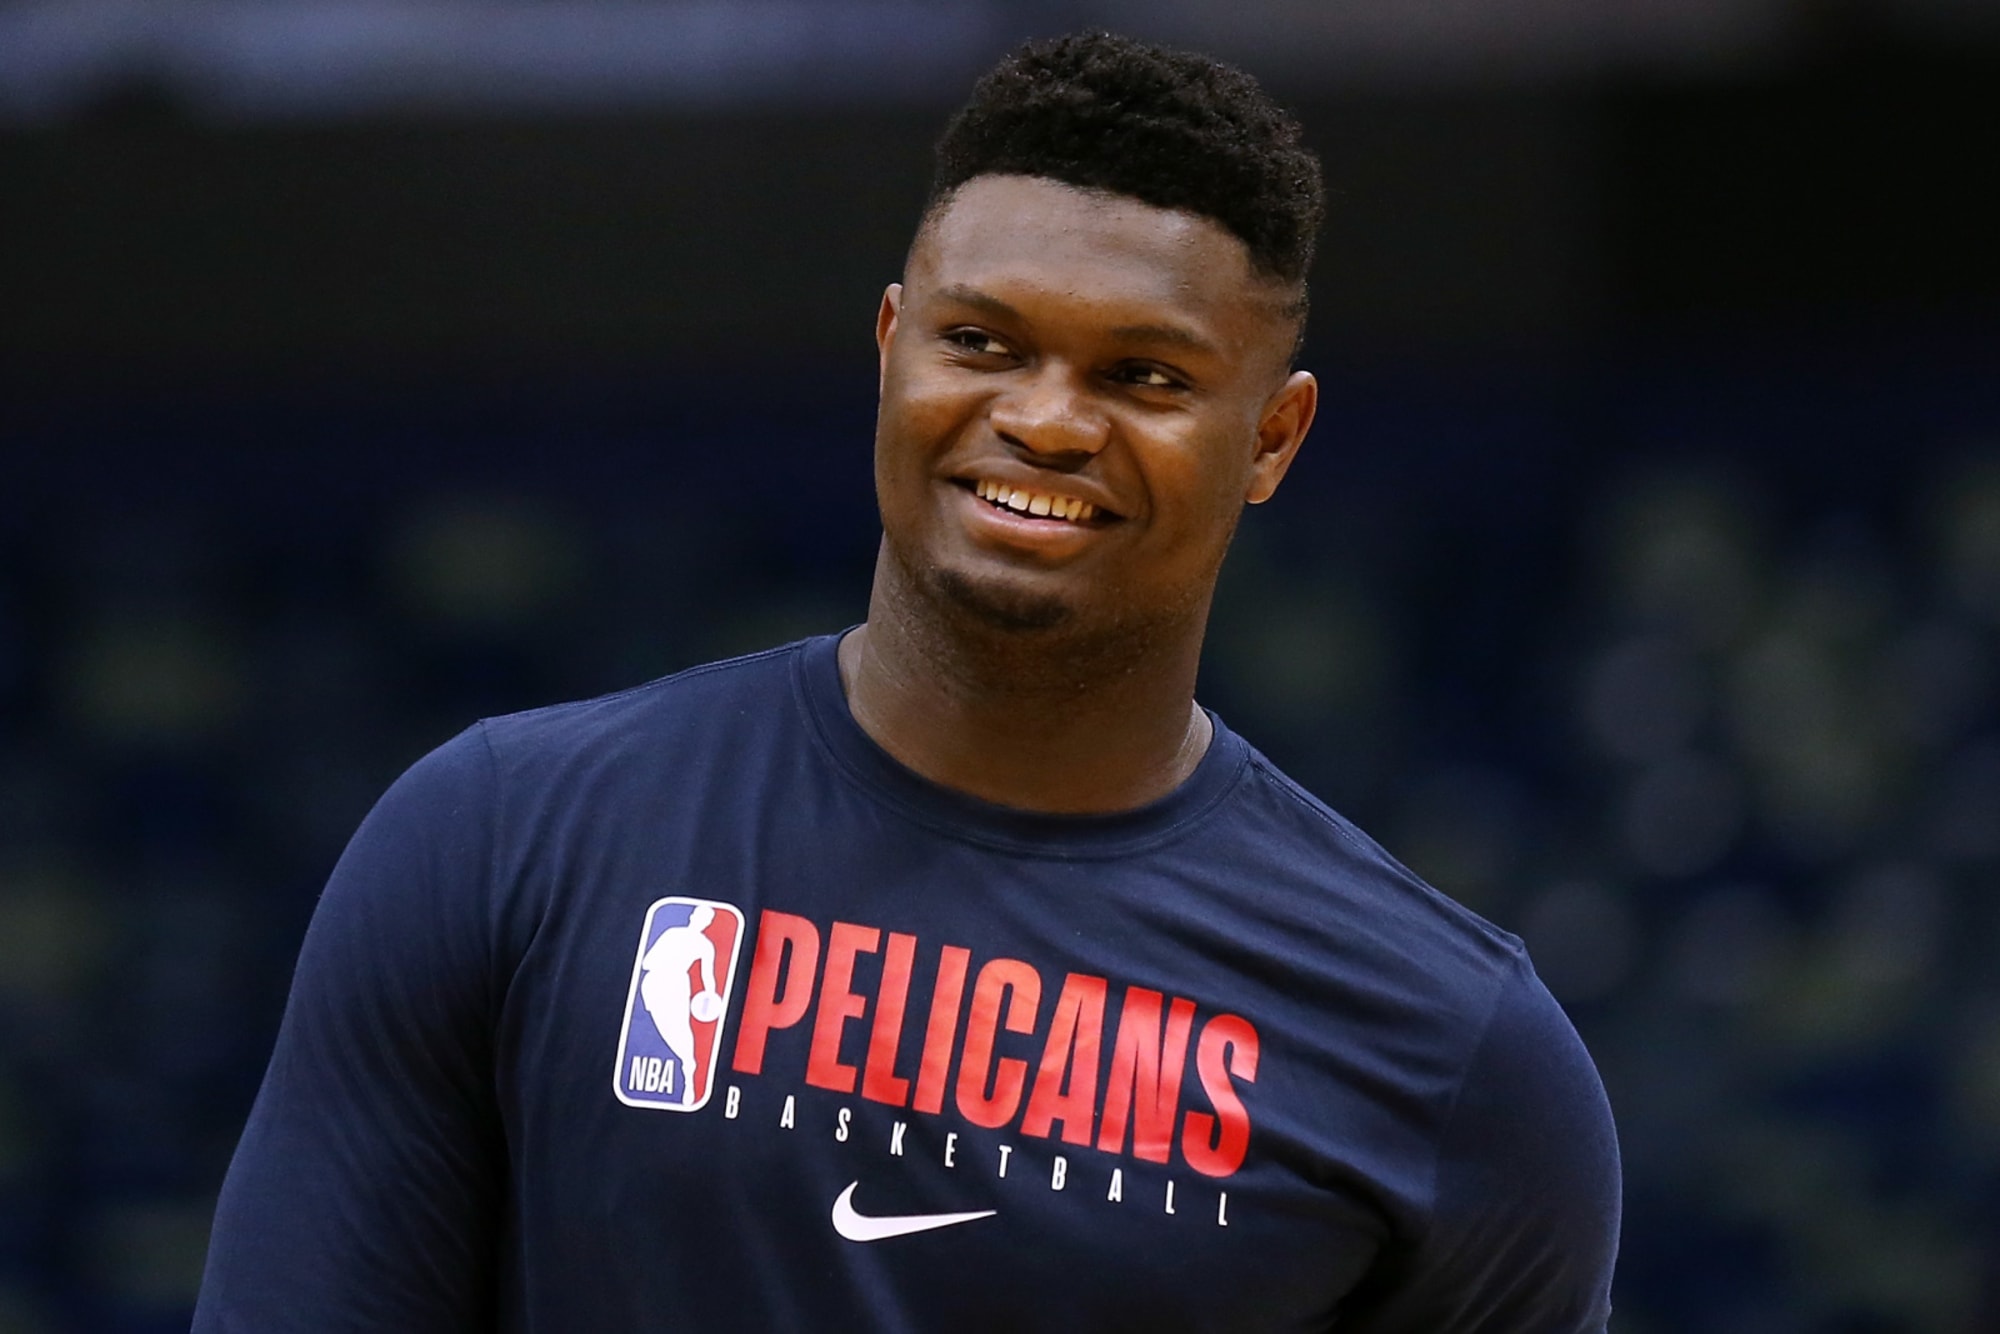 Zion Williamson marks NBA debut for Pelicans with series of huge dunks, NBA